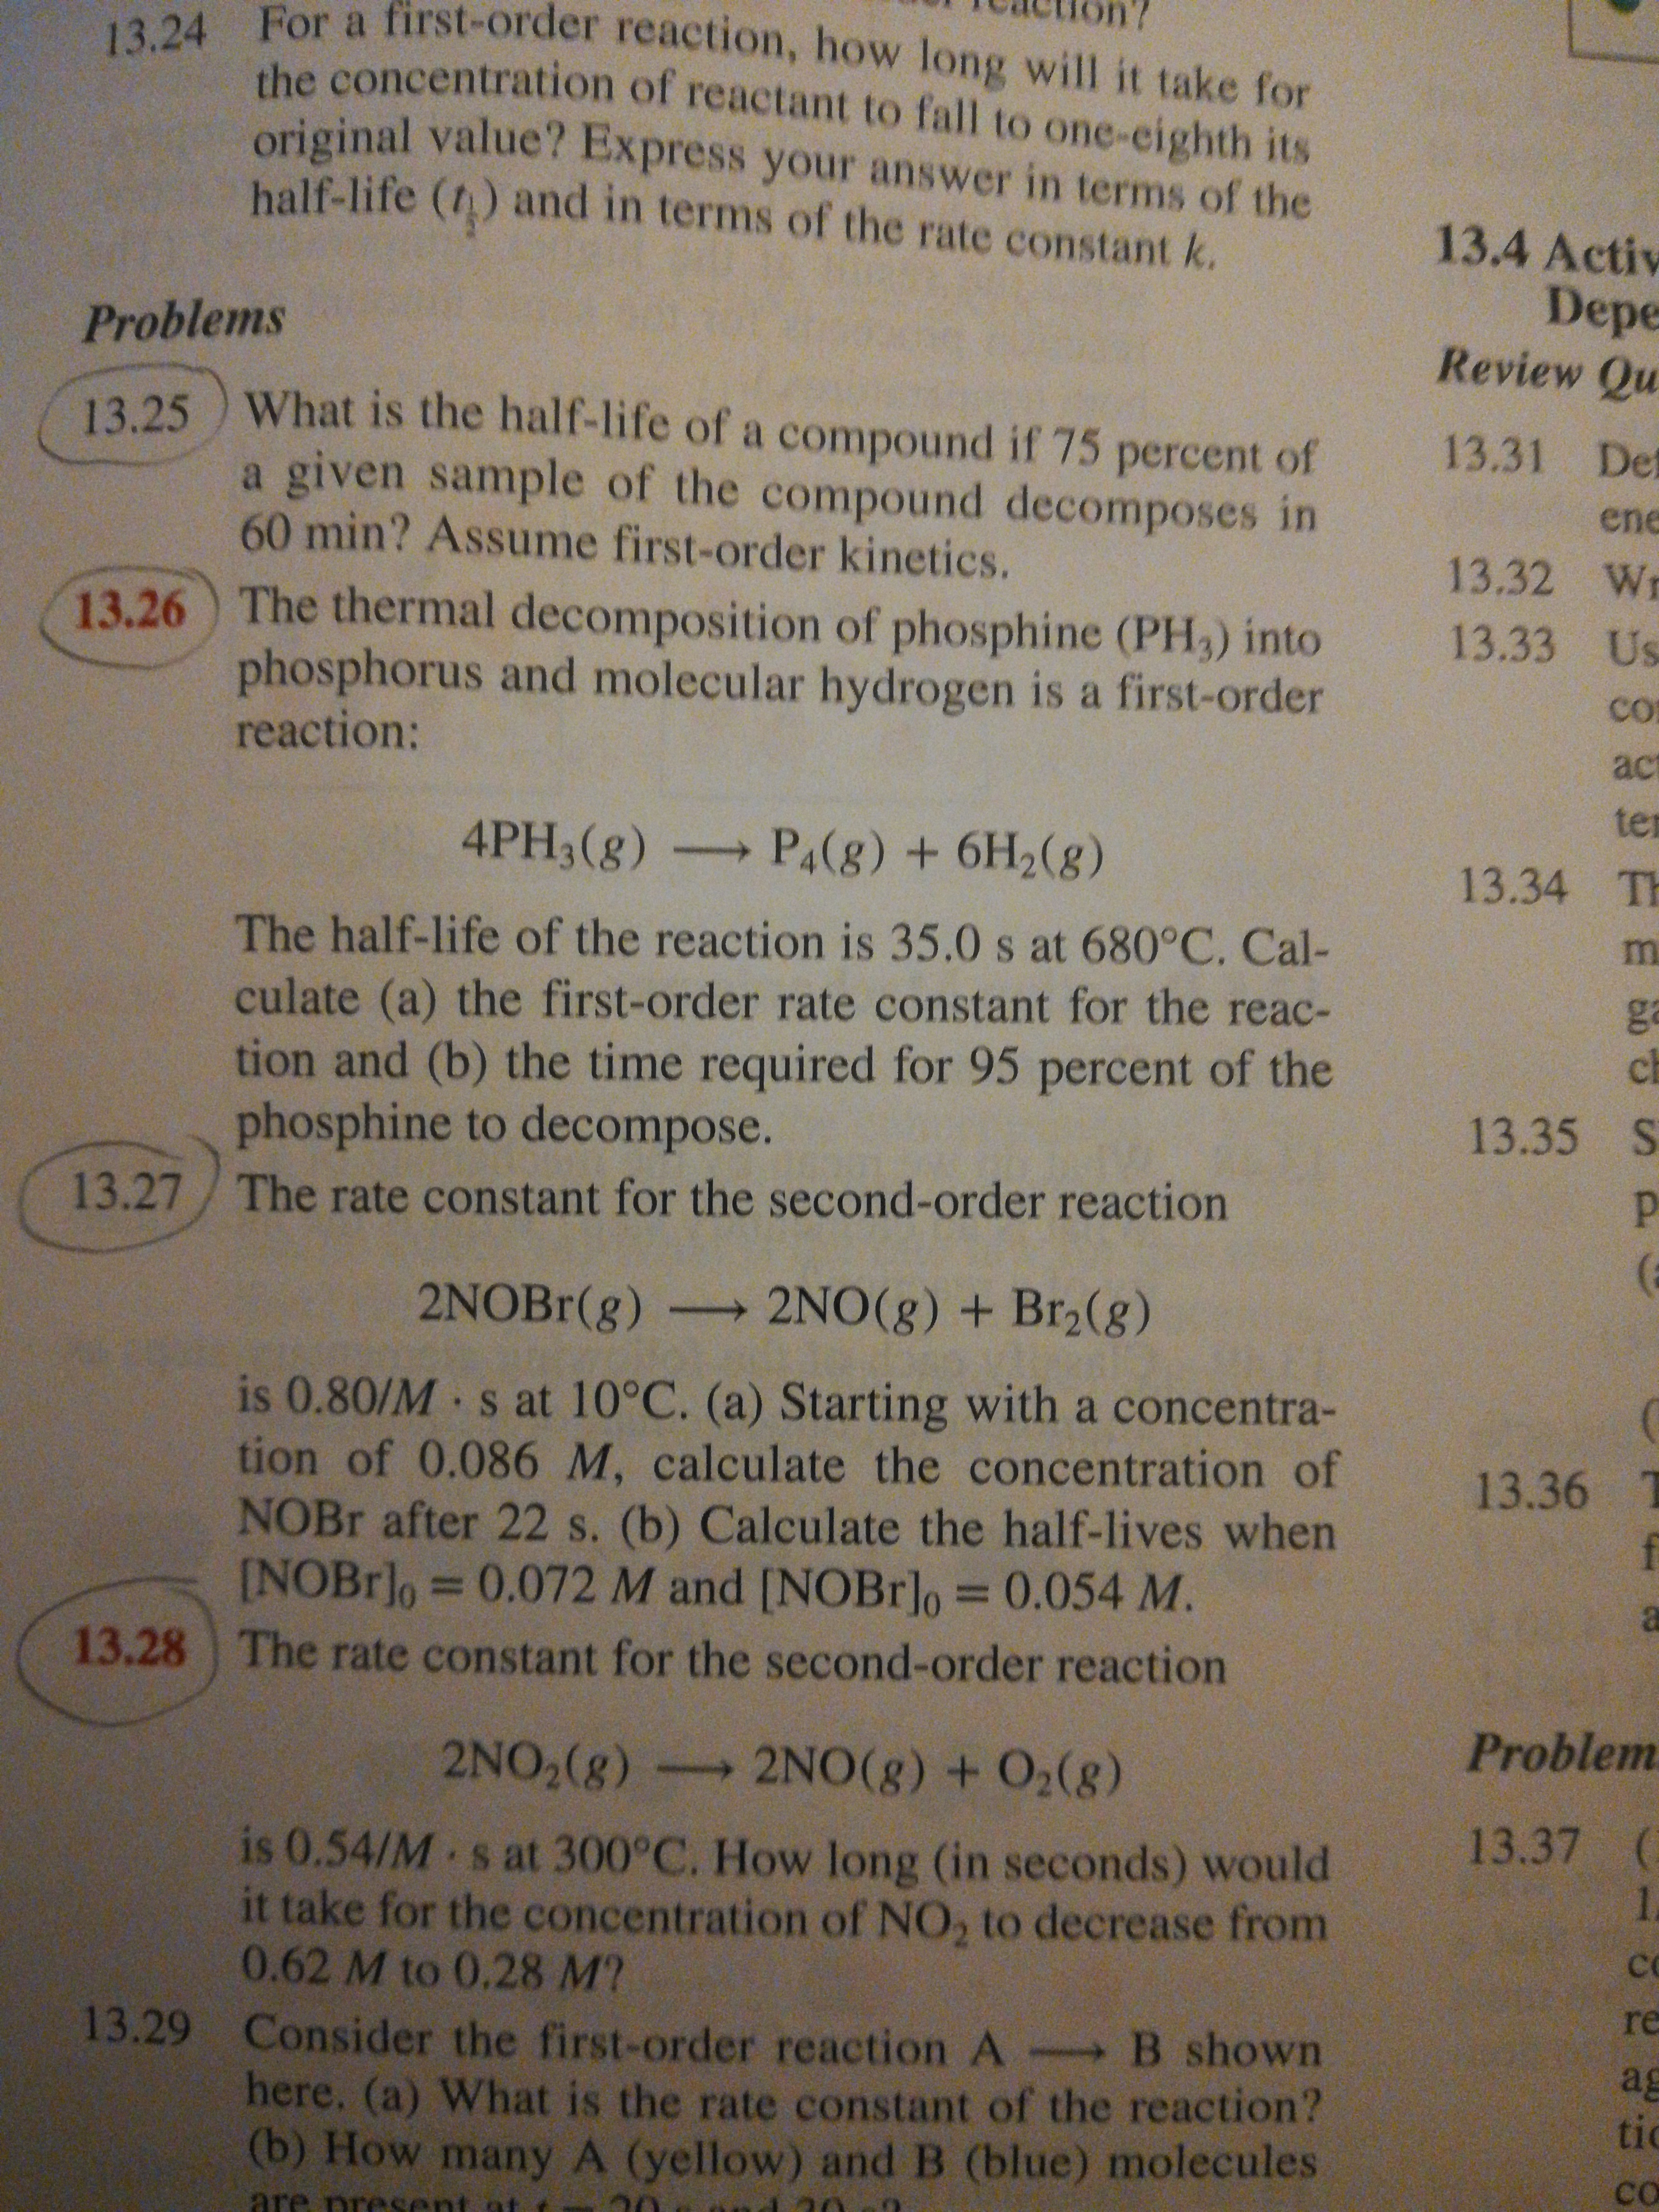 13.24 For a first-order reaction, how long will it take for
the concentration of reactant to fall to one-eighth its
original value? Express your answer in terms of the
balf-life (t) and in terms of the rate constant k.
13.4 Activ
Depe
Review Qu
Problems
13.25 ) What is the half-life of a compound if 75 percent of
a given sample of the compound decomposes in
60min? Assume first-order kinetics.
13.31 Det
ene
13.32 Wr
13.26 The thermal decomposition of phosphine (PH3) into
13.33 Us
phosphorus and molecular hydrogen is a first-order
reaction:
CO
act
ter
4PH3(g) P4(8) + 6H2(8)
13.34 TH
The half-life of the reaction is 35.0 s at 680°C. Cal-
culate (a) the first-order rate constant for the reac-
tion and (b) the time required for 95 percent of the
phosphine to decompose.
ga
ch
13.35 S
13.27/ The rate constant for the second-order reaction
2NOBr(g)
2NO(g) + Br2(g)
is 0.80/M s at 10°C. (a) Starting with a concentra-
tion of 0.086 M, calculate the concentration of
NOBR after 22 s. (b) Calculate the half-lives when
[NOBr]o = 0.072 M and [NOBr]o = 0.054 M.
13.36
%3D
%3D
a
13.28 The rate constant for the second-order reaction
Problem
2NO,(g) 2NO(g) + O2(g)
13.37 (
is 0.54/M s at 300°C. How long (in seconds) would
it take for the concentration of NO, to decrease from
0.62 M to 0.28 M?
1.
CO
re
13.29 Consider the first-order reaction A B shown
ag
tic
here. (a) What is the rate constant of the reaction?
(b) How many A (yellow) and B (blue) molecules
are prese
co
ent at
